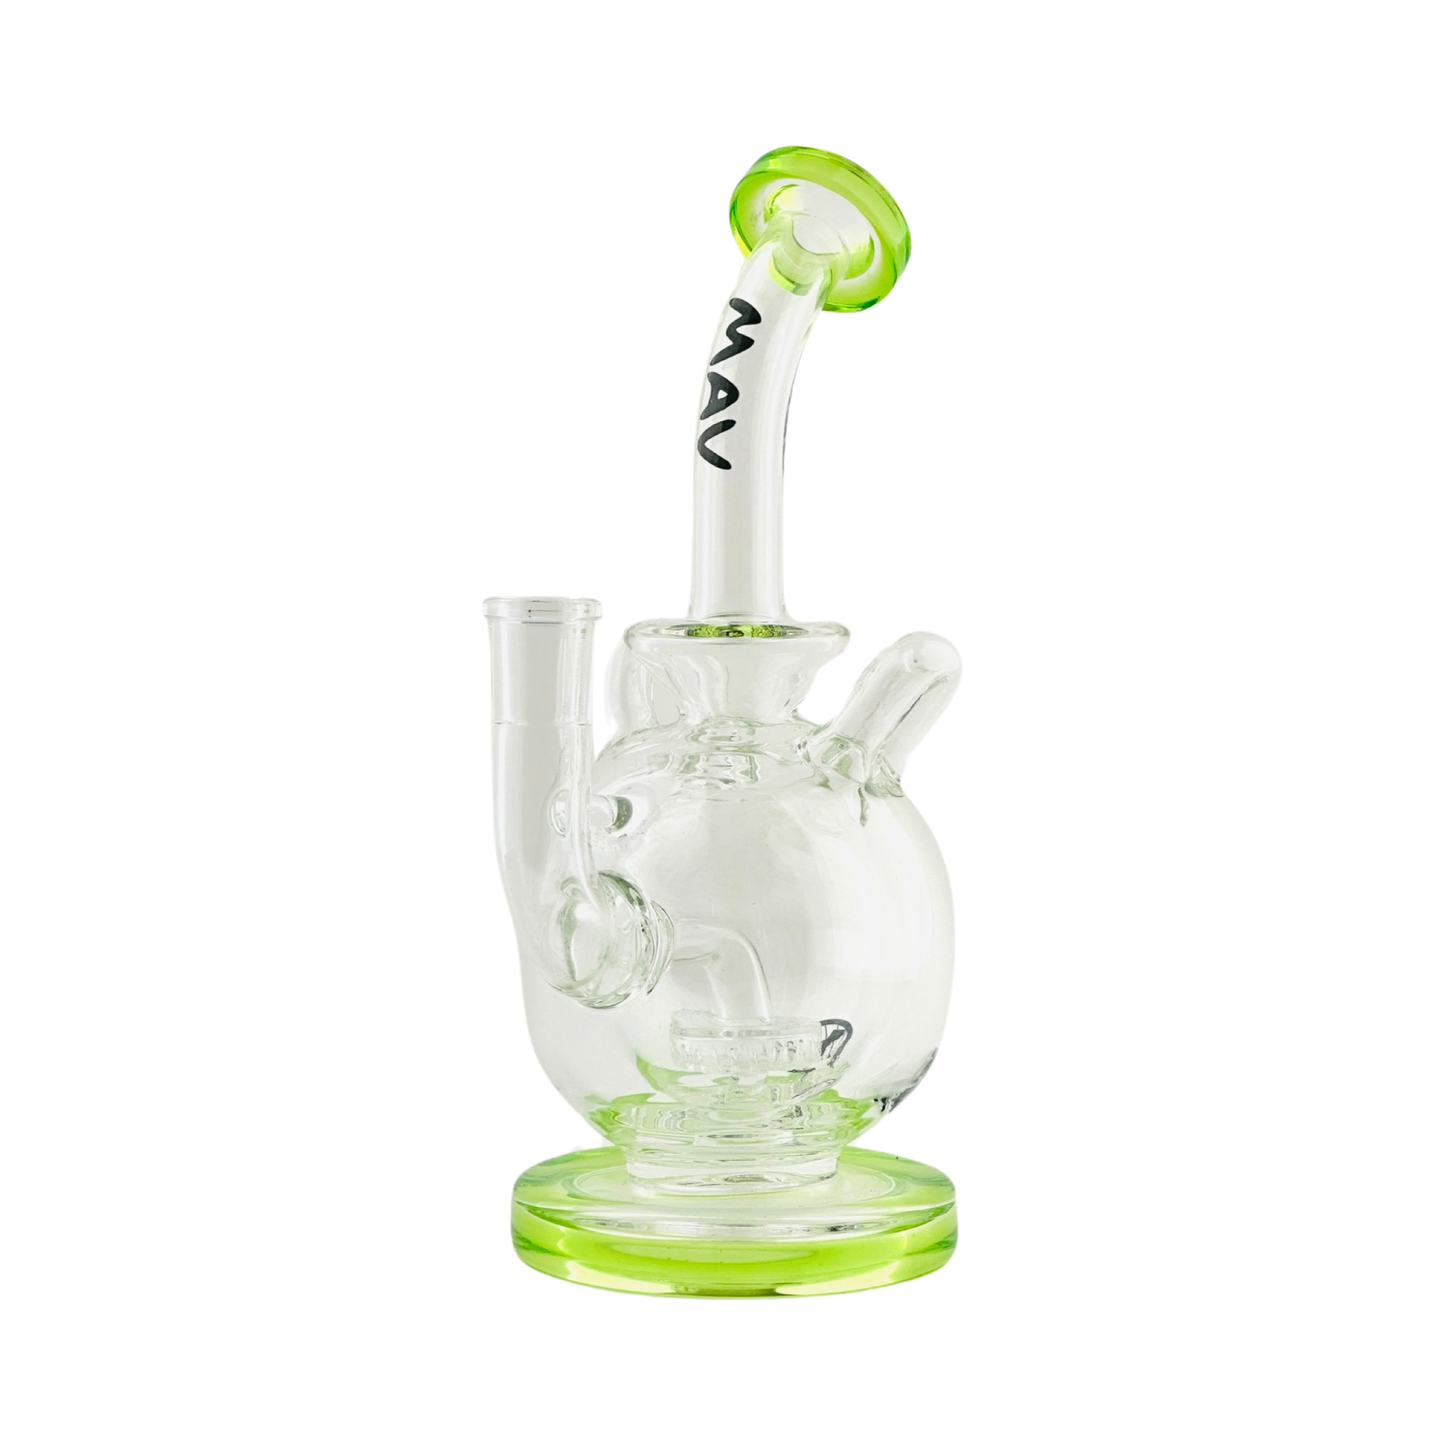 The Mojave Double Uptake Incycler Recycler